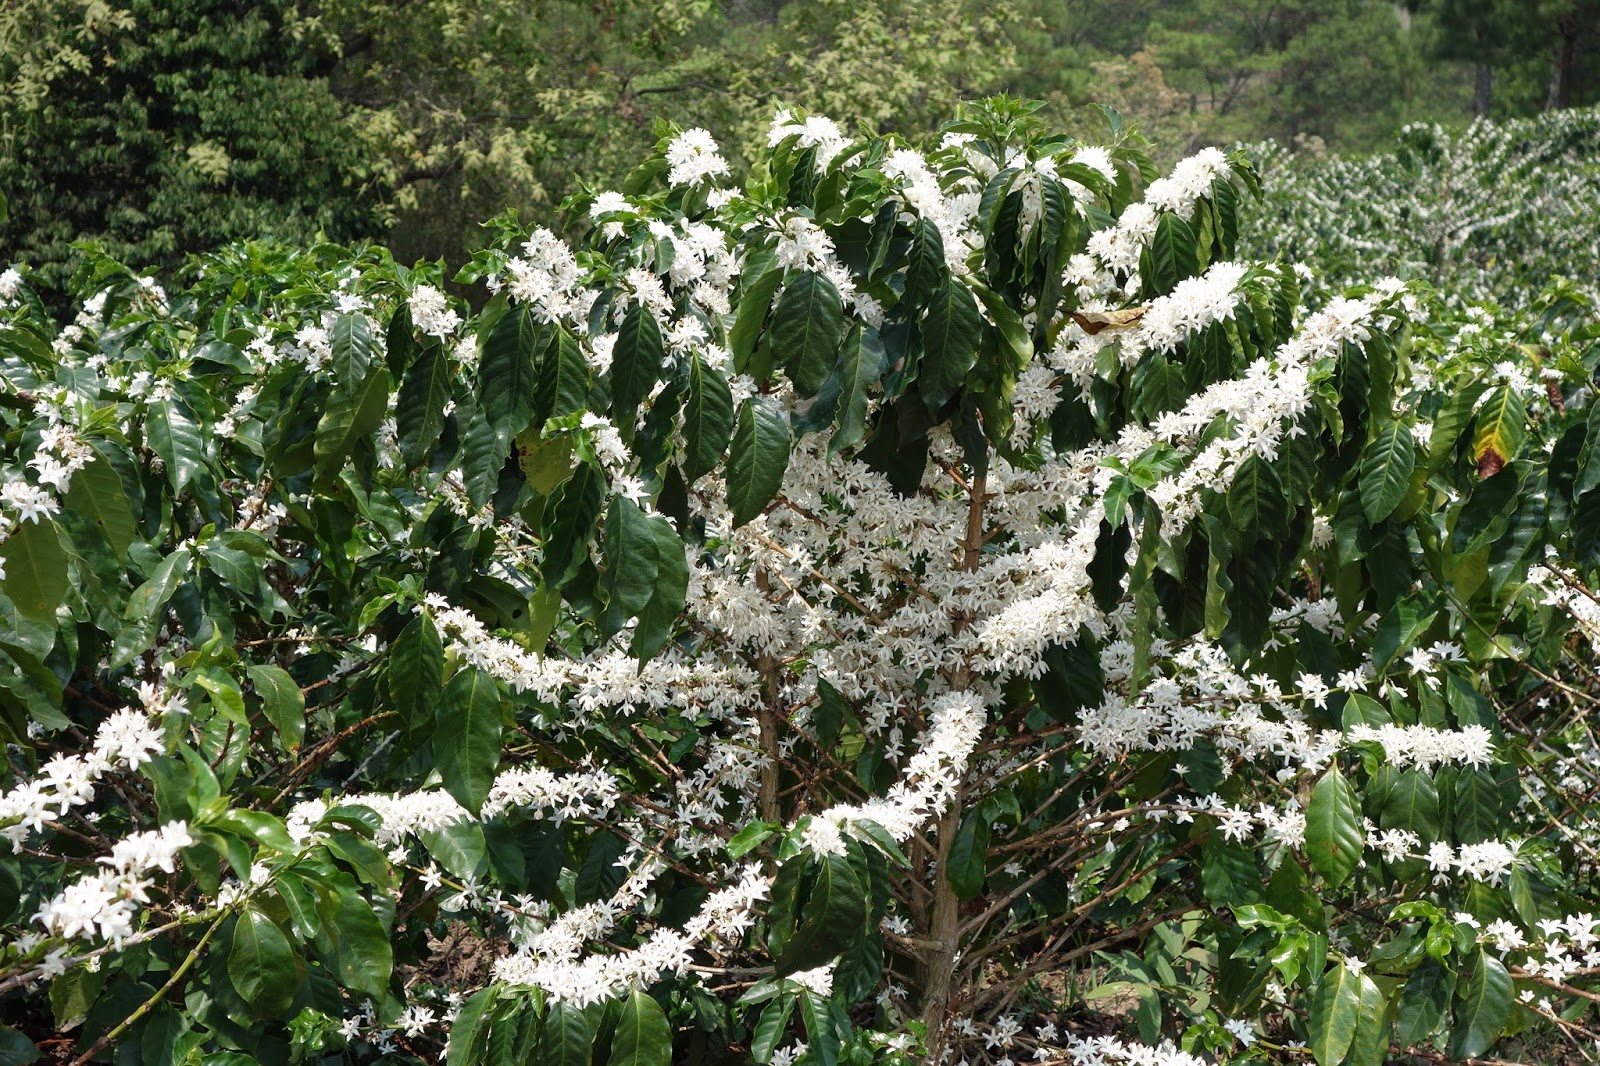 Hermano Juancito: The smell of coffee (flowers) in the air.